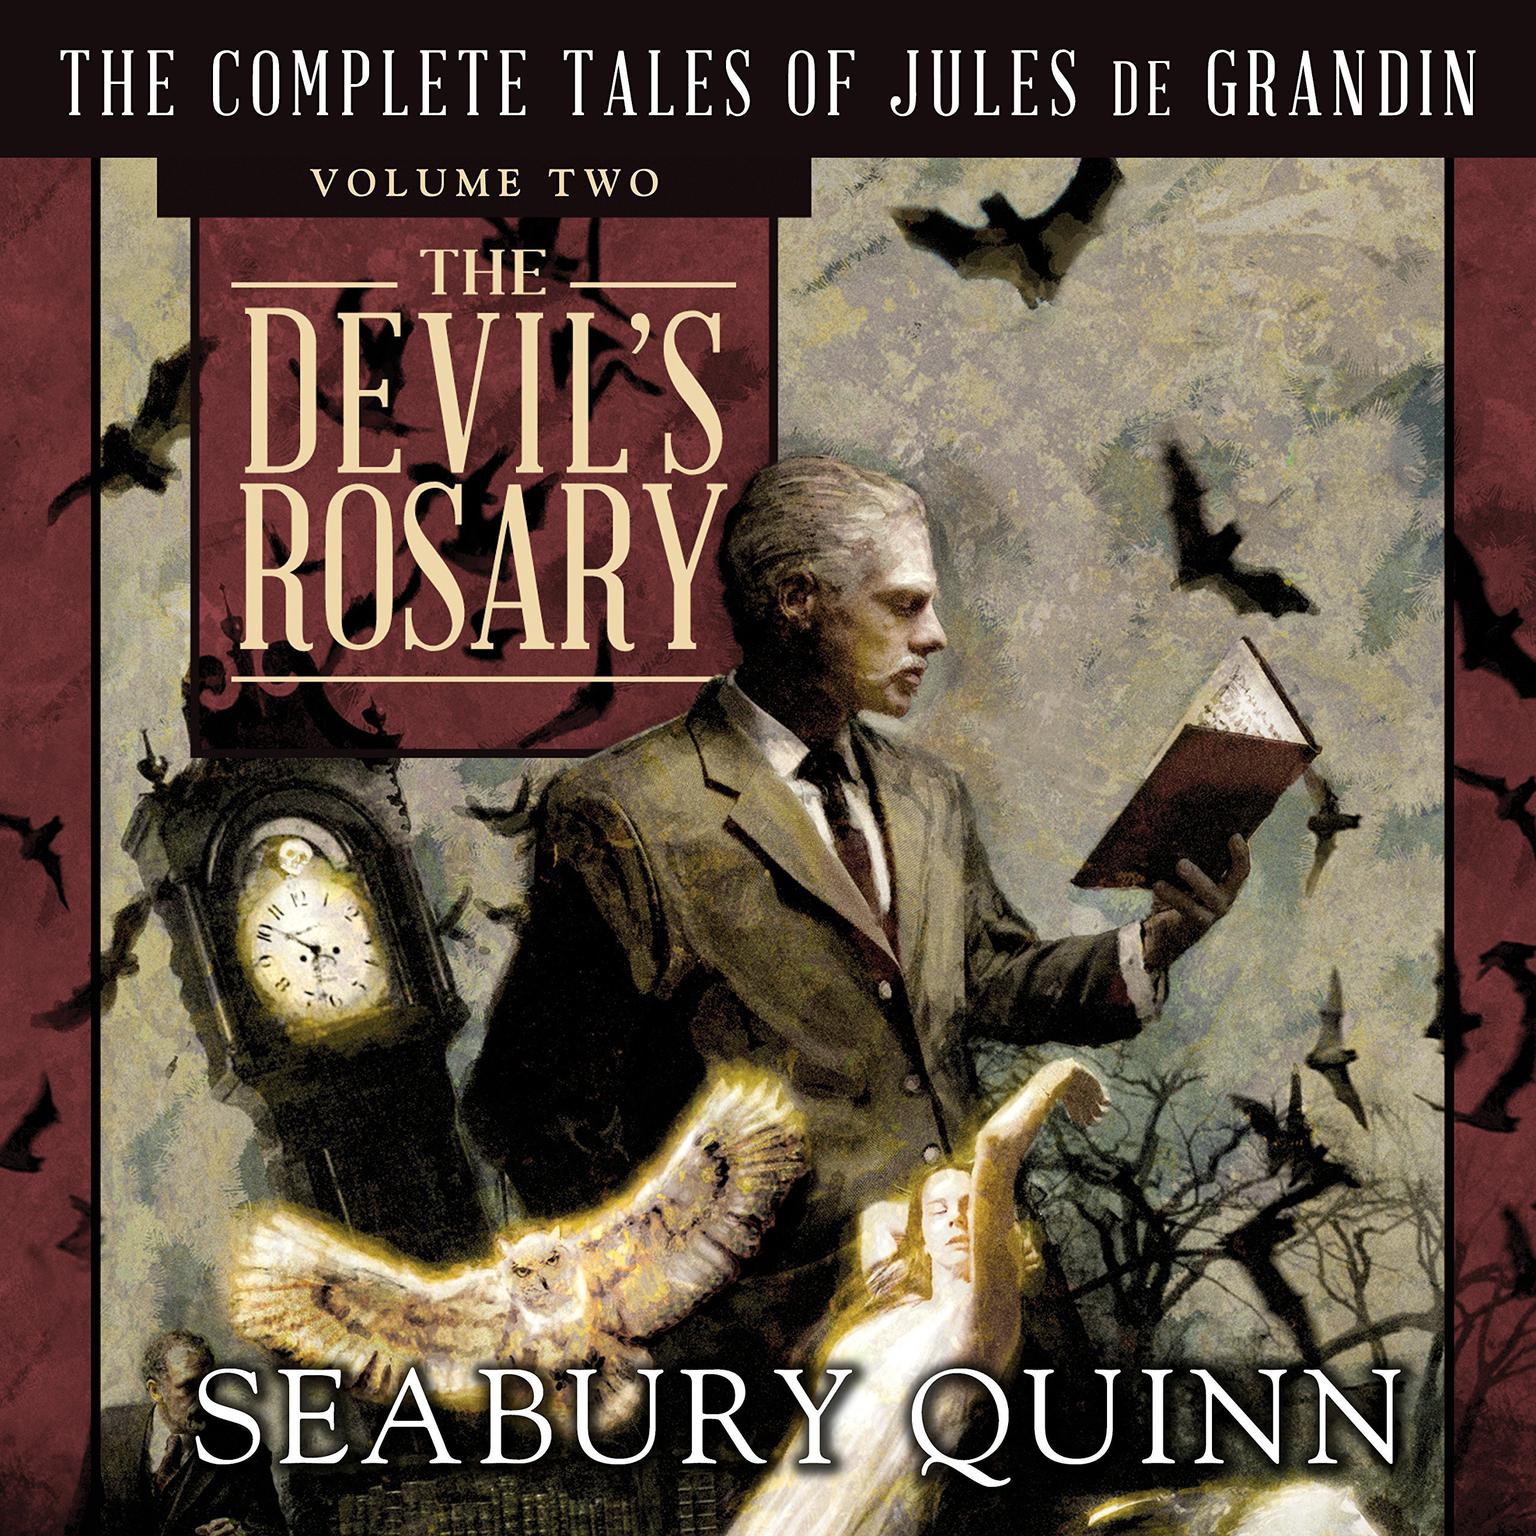 The Devils Rosary: The Complete Tales of Jules de Grandin, Volume Two Audiobook, by Seabury Quinn